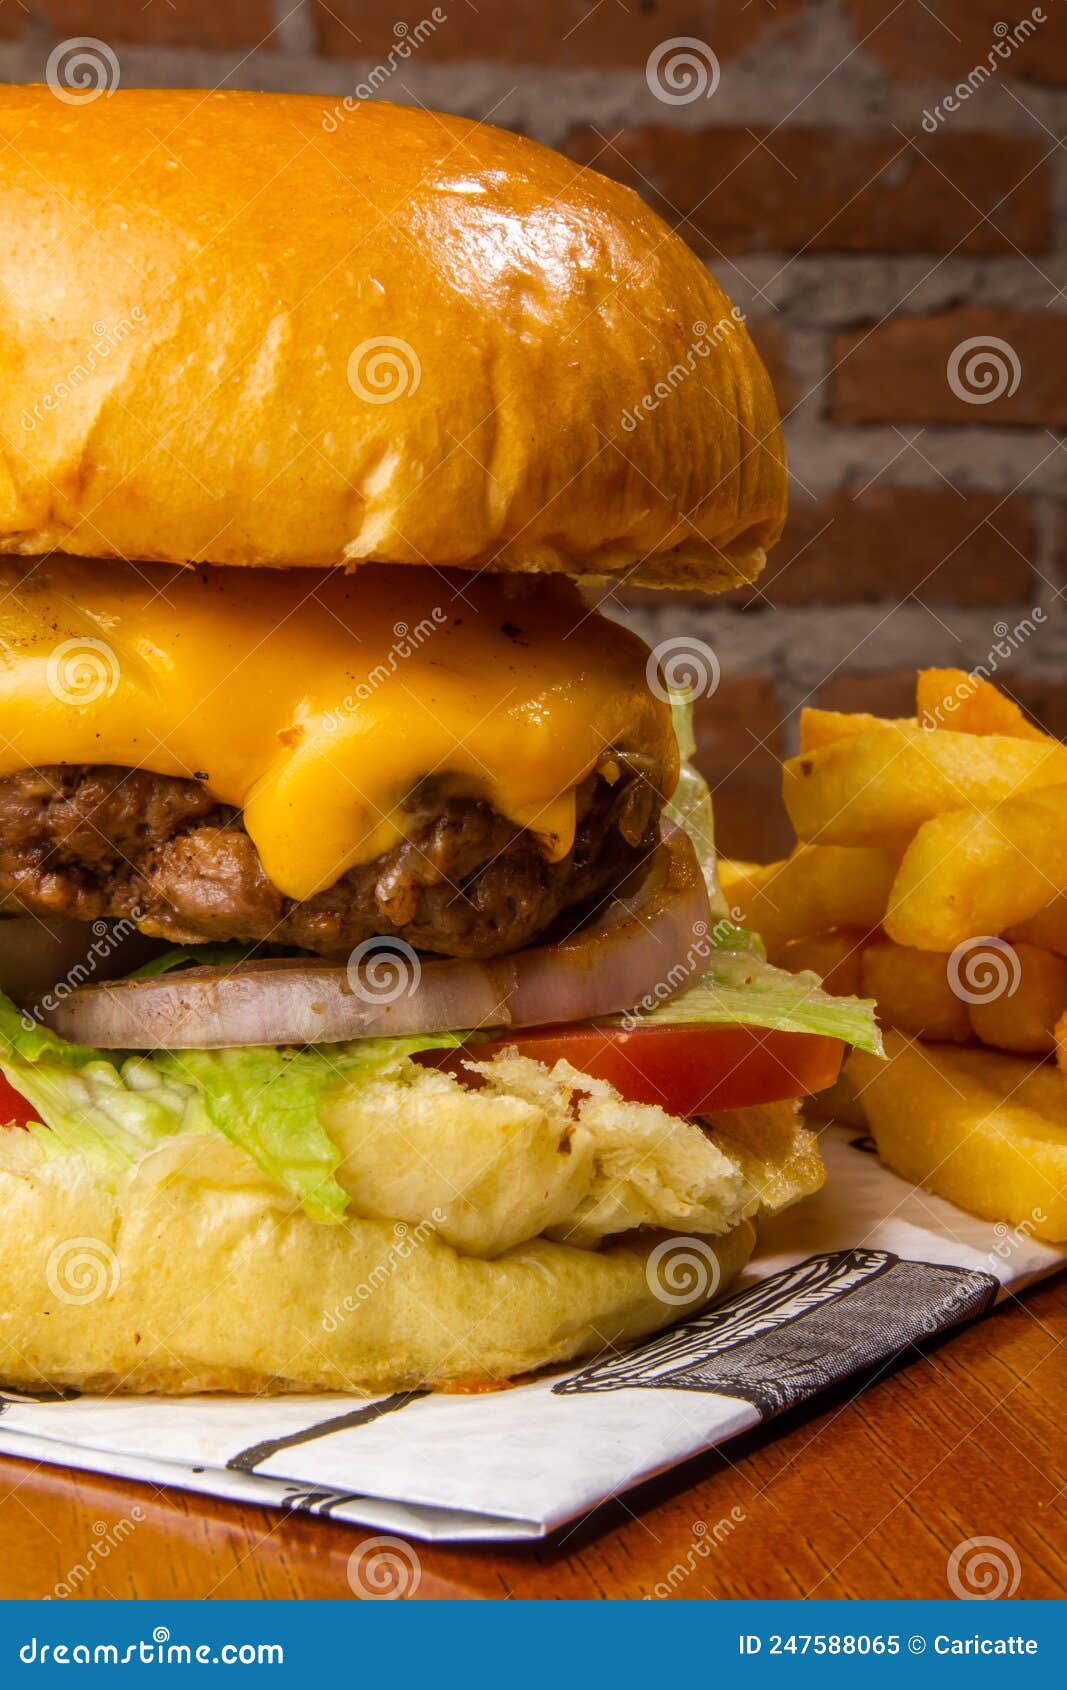 detailed cheeseburger with salad and fries